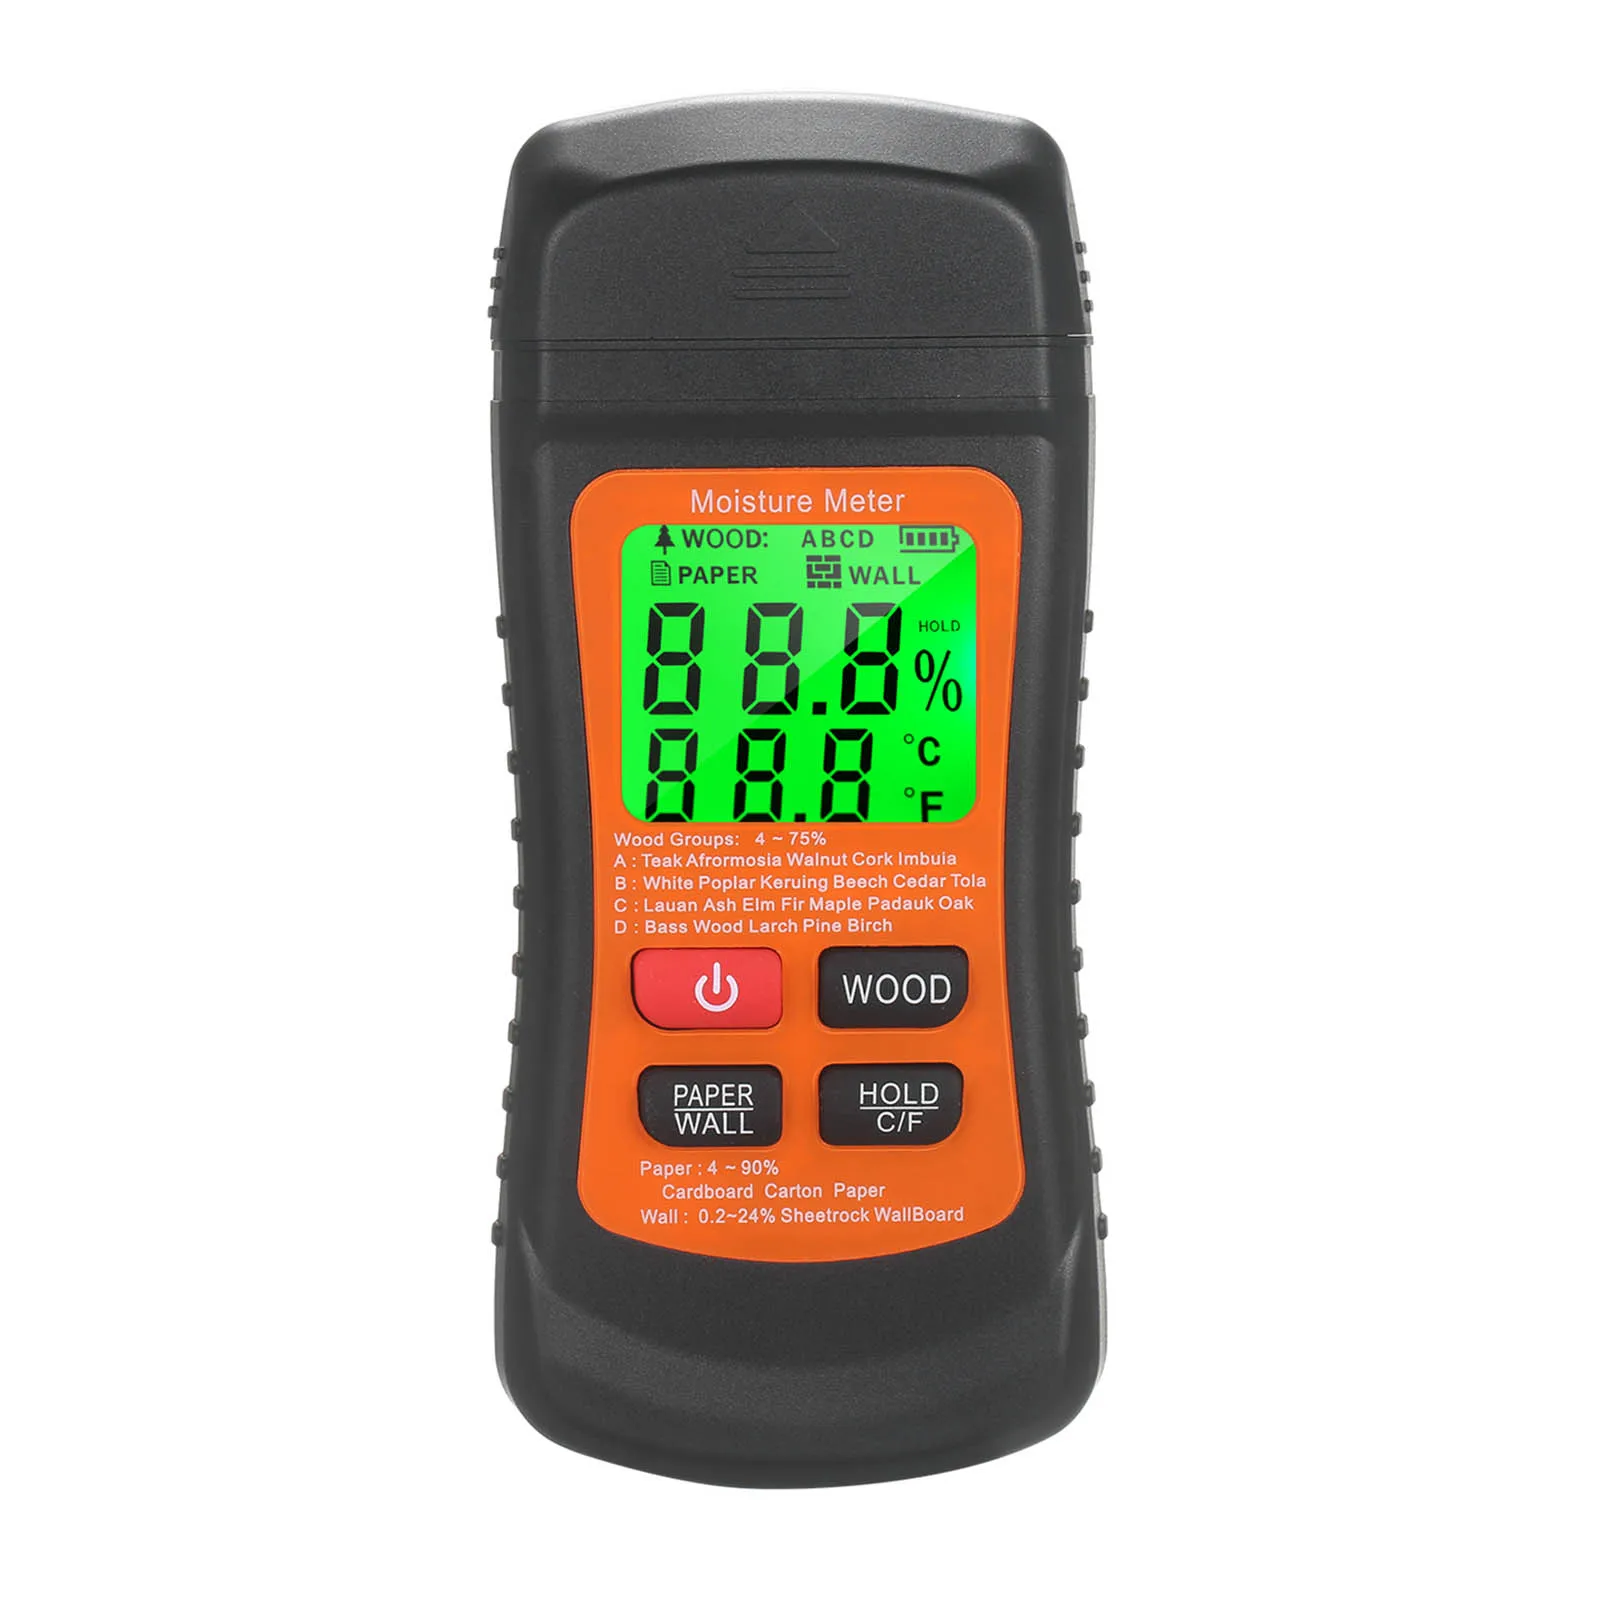 

Two Pins Type Wooden Moisture Meter 3 In 1 Moisture Humidity Tester With LCD Display Timber Dampness Detector For Accurately